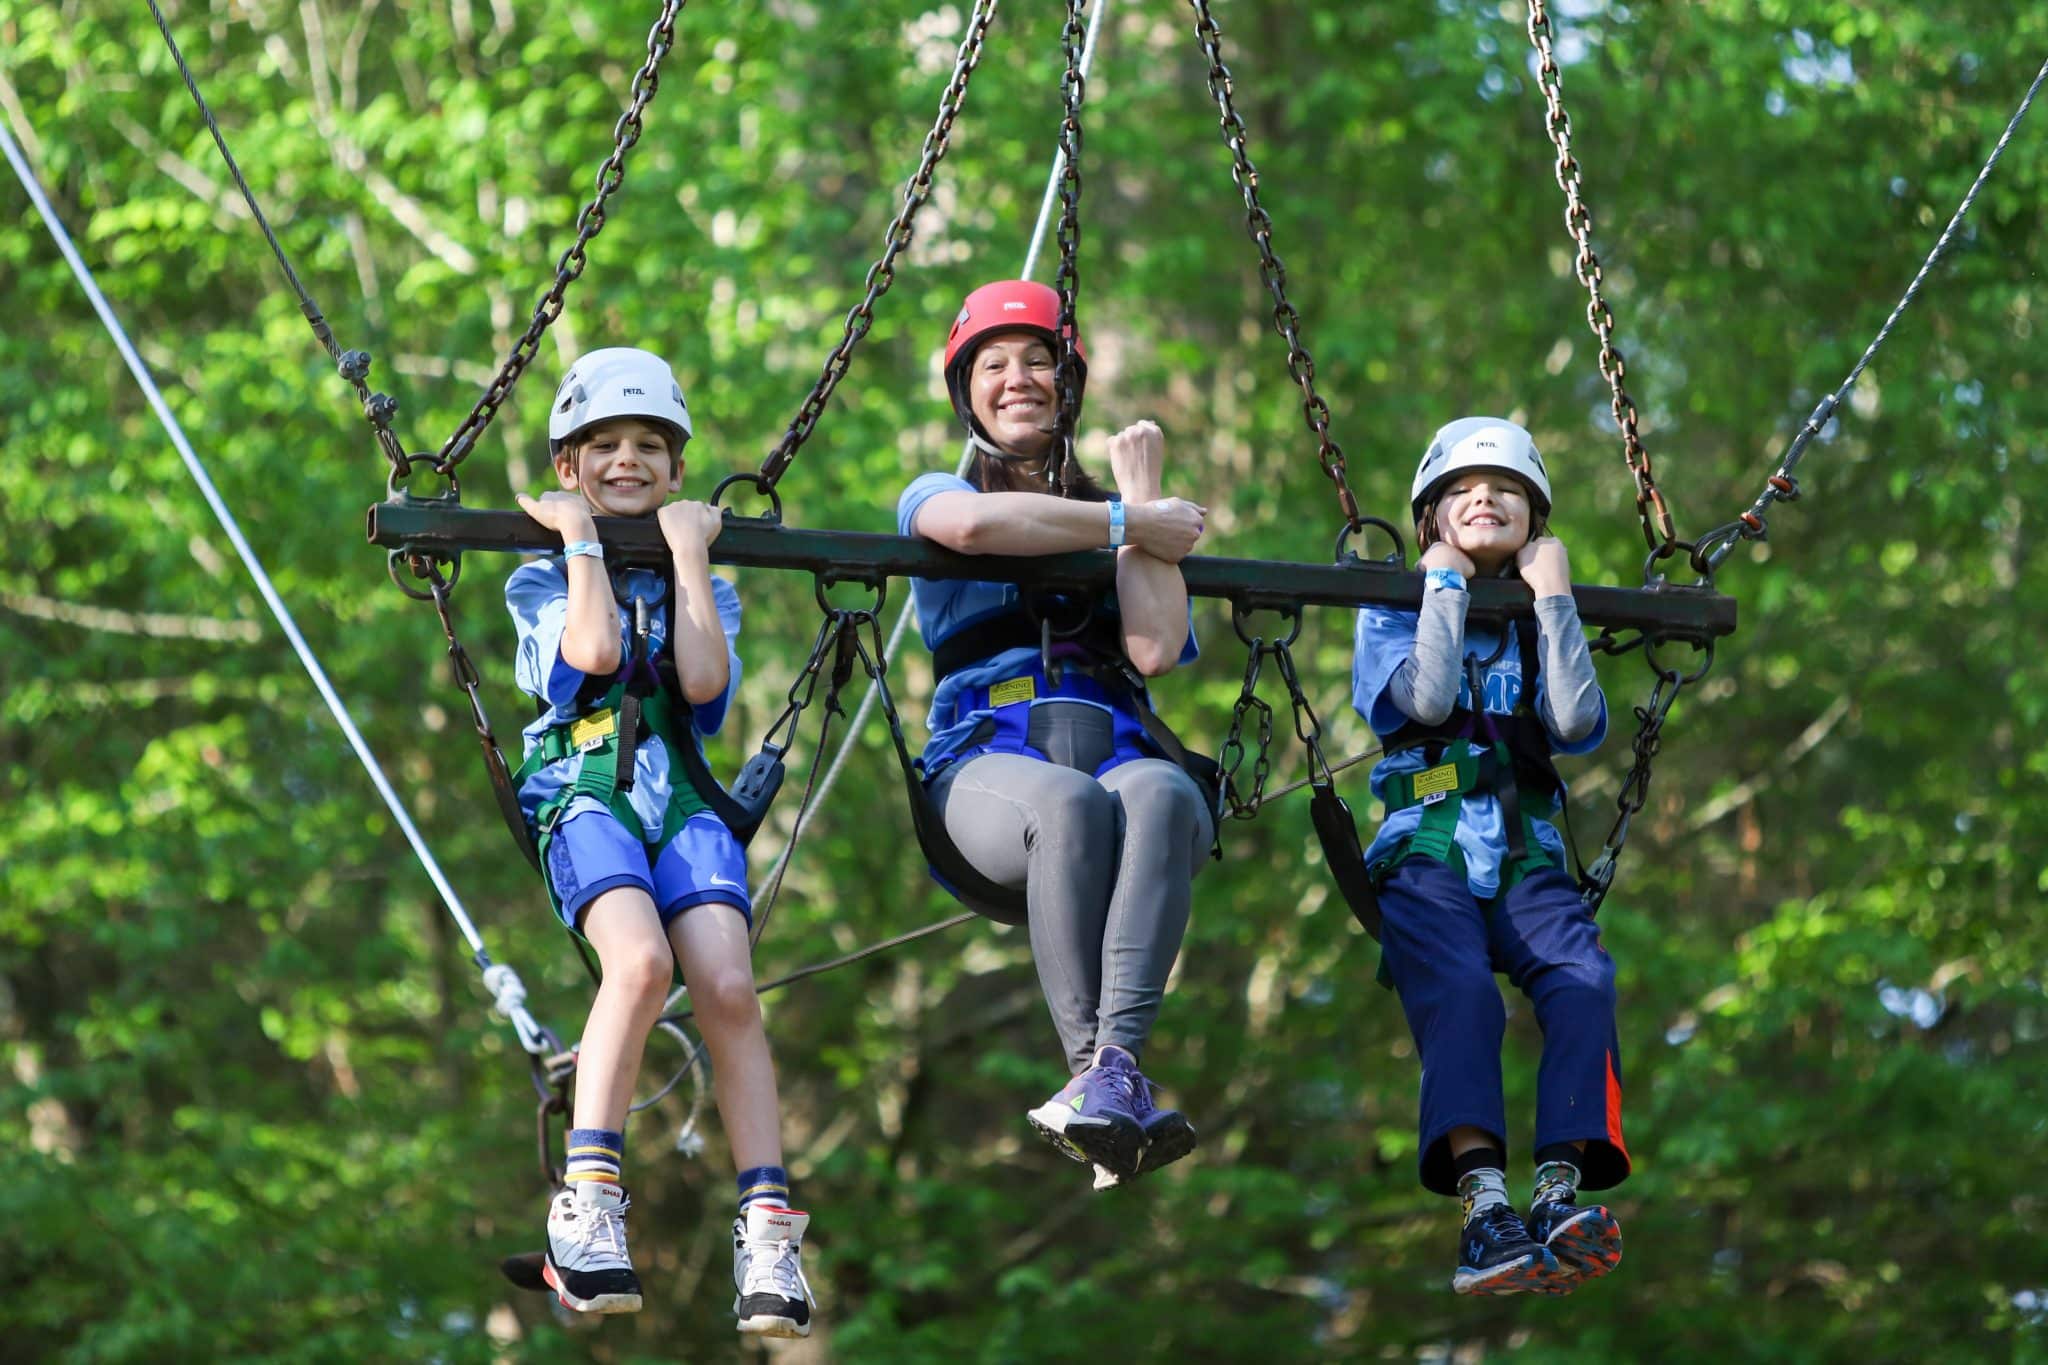 Mom and sons smiling on Camp Olympia Giant Swing.